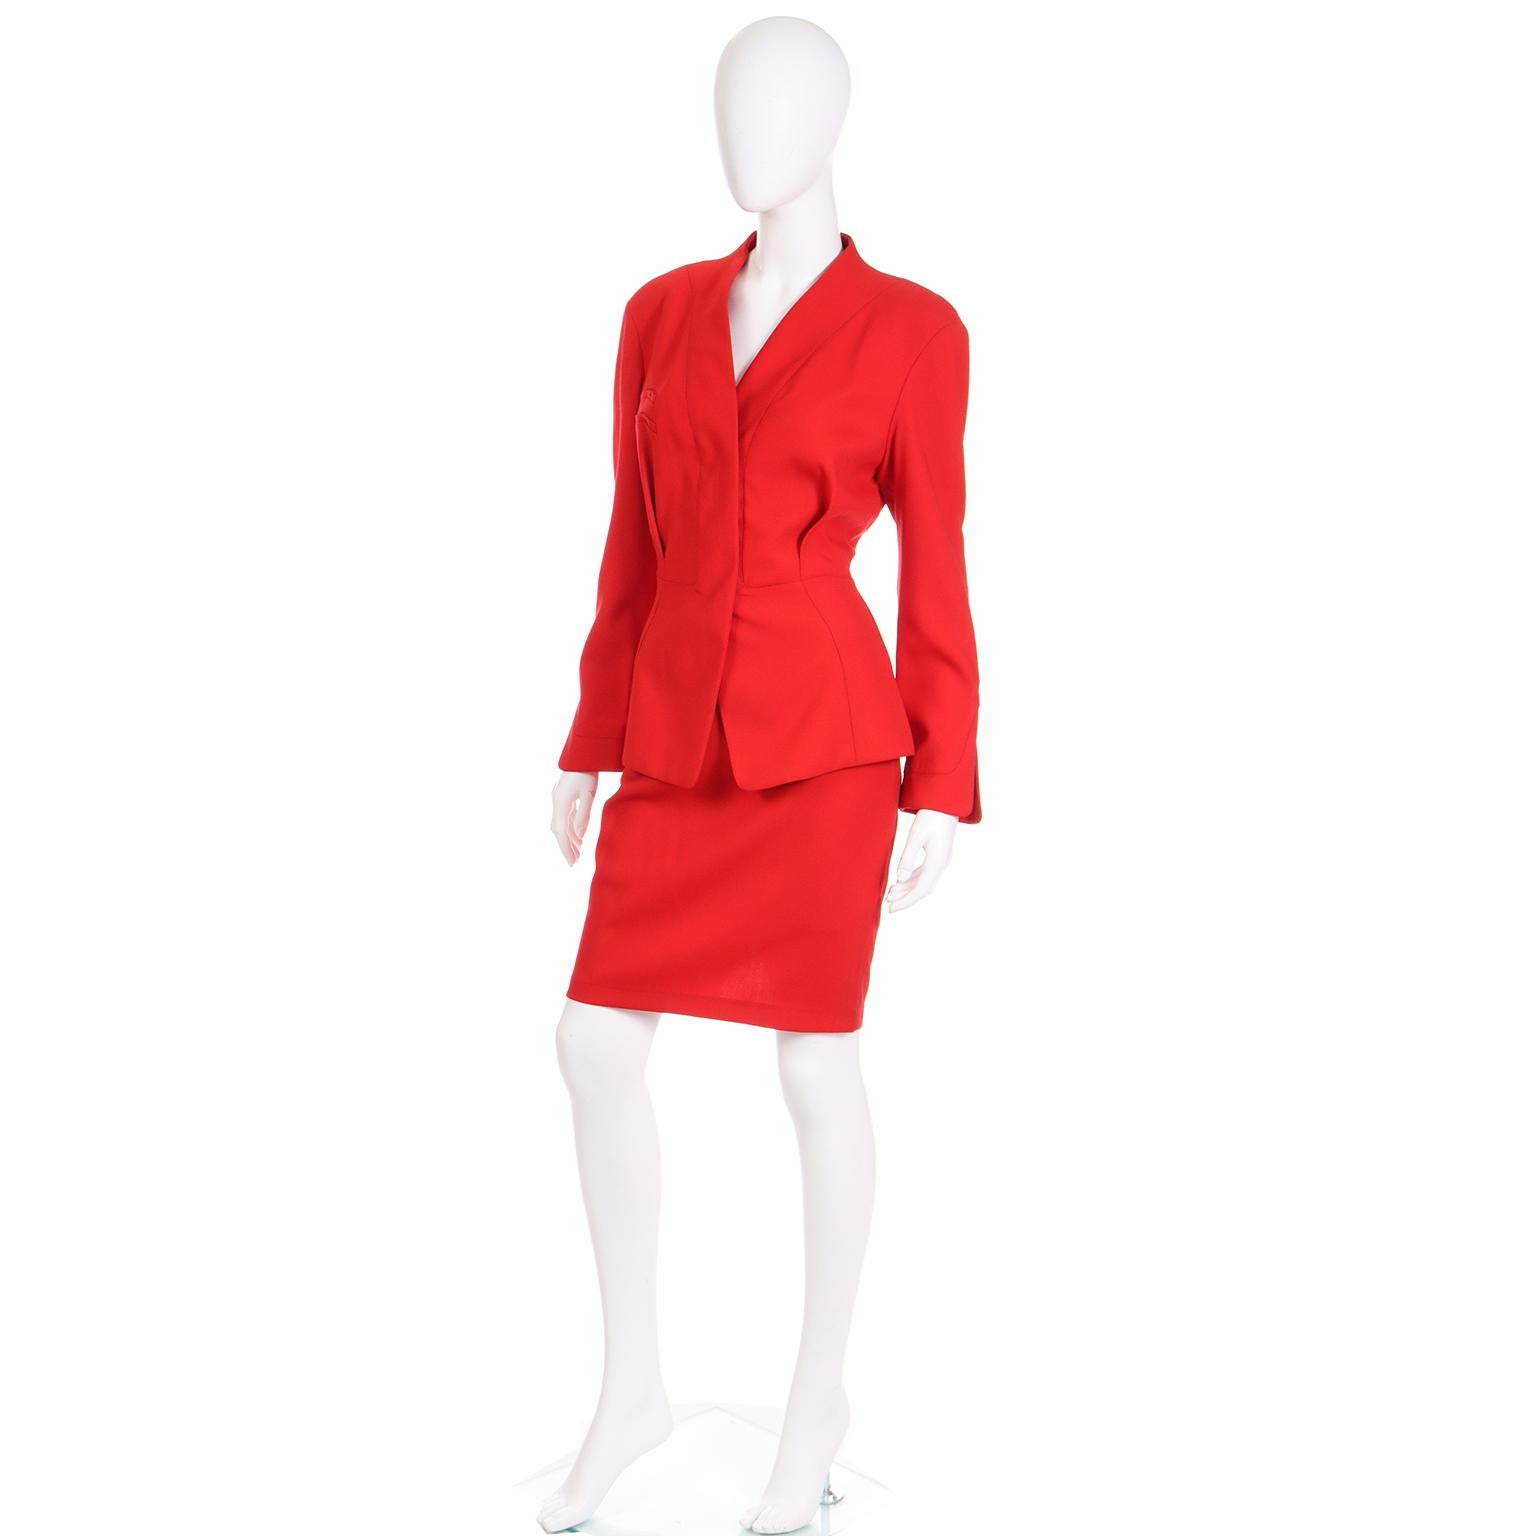 Vintage Red Thierry Mugler Jacket and Skirt Suit Deadstock w Tags 1